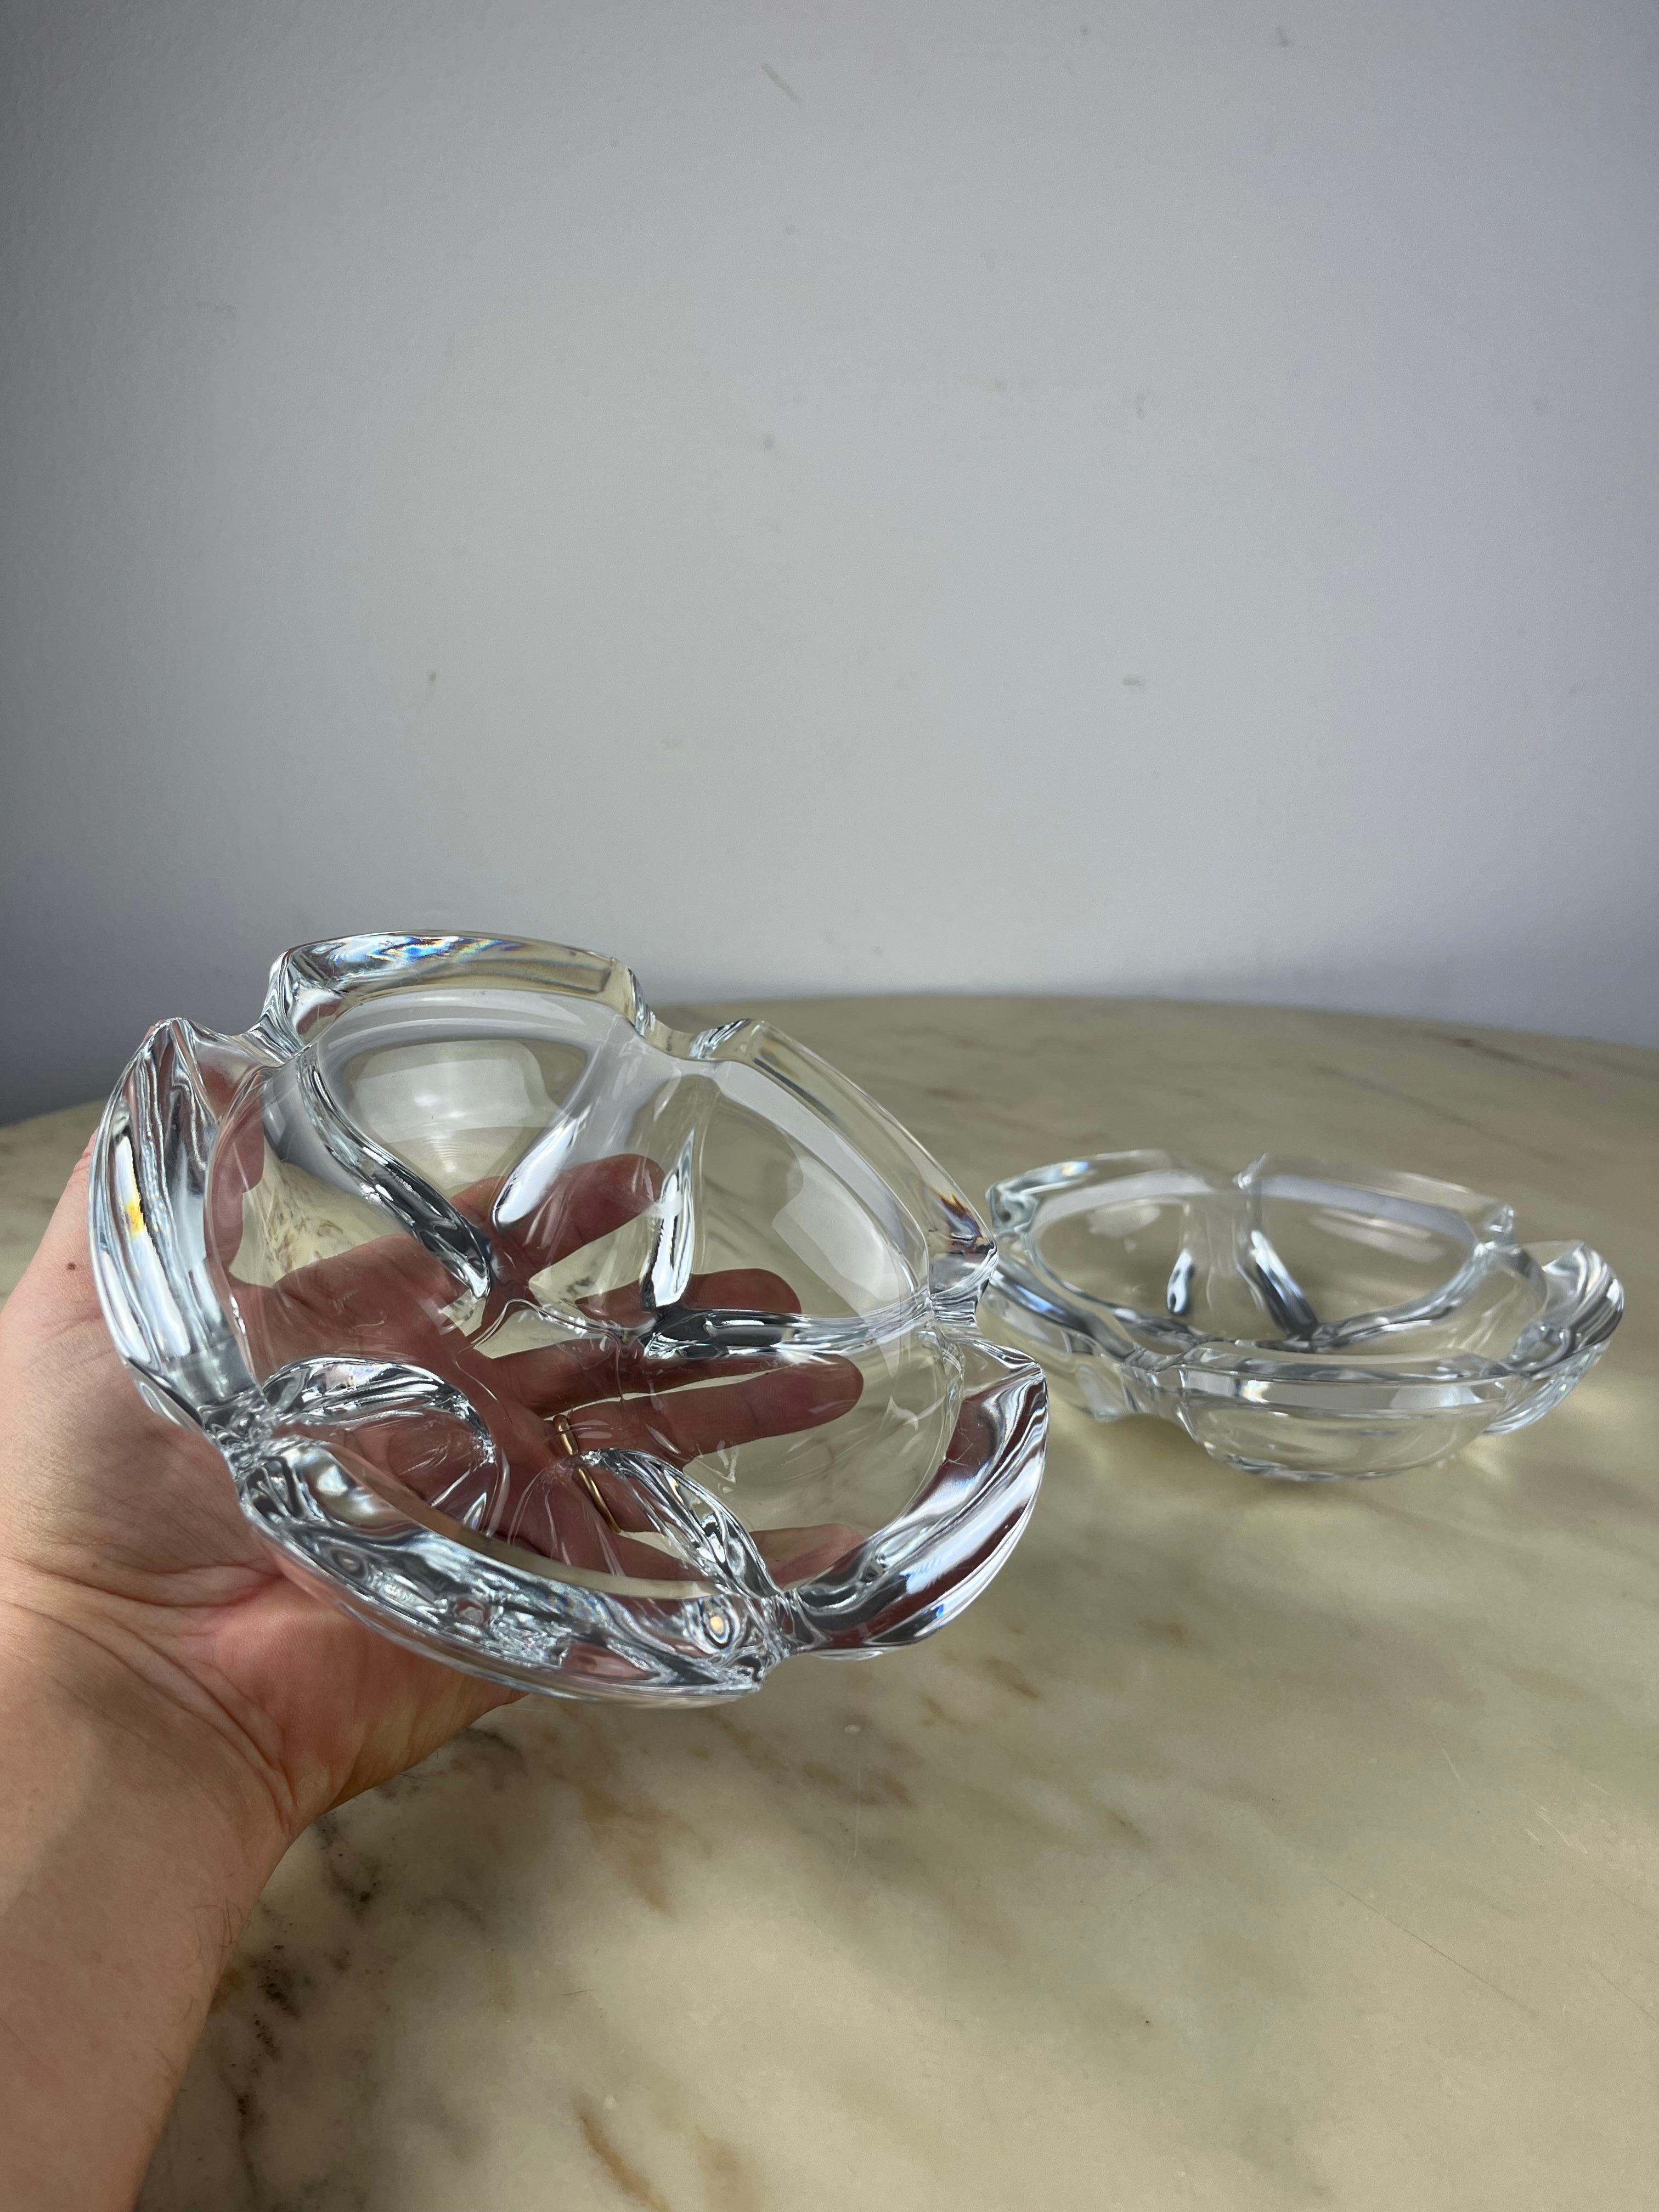 Pair of large vintage glass ashtrays, Italy, 1970s
Intact and in good condition.